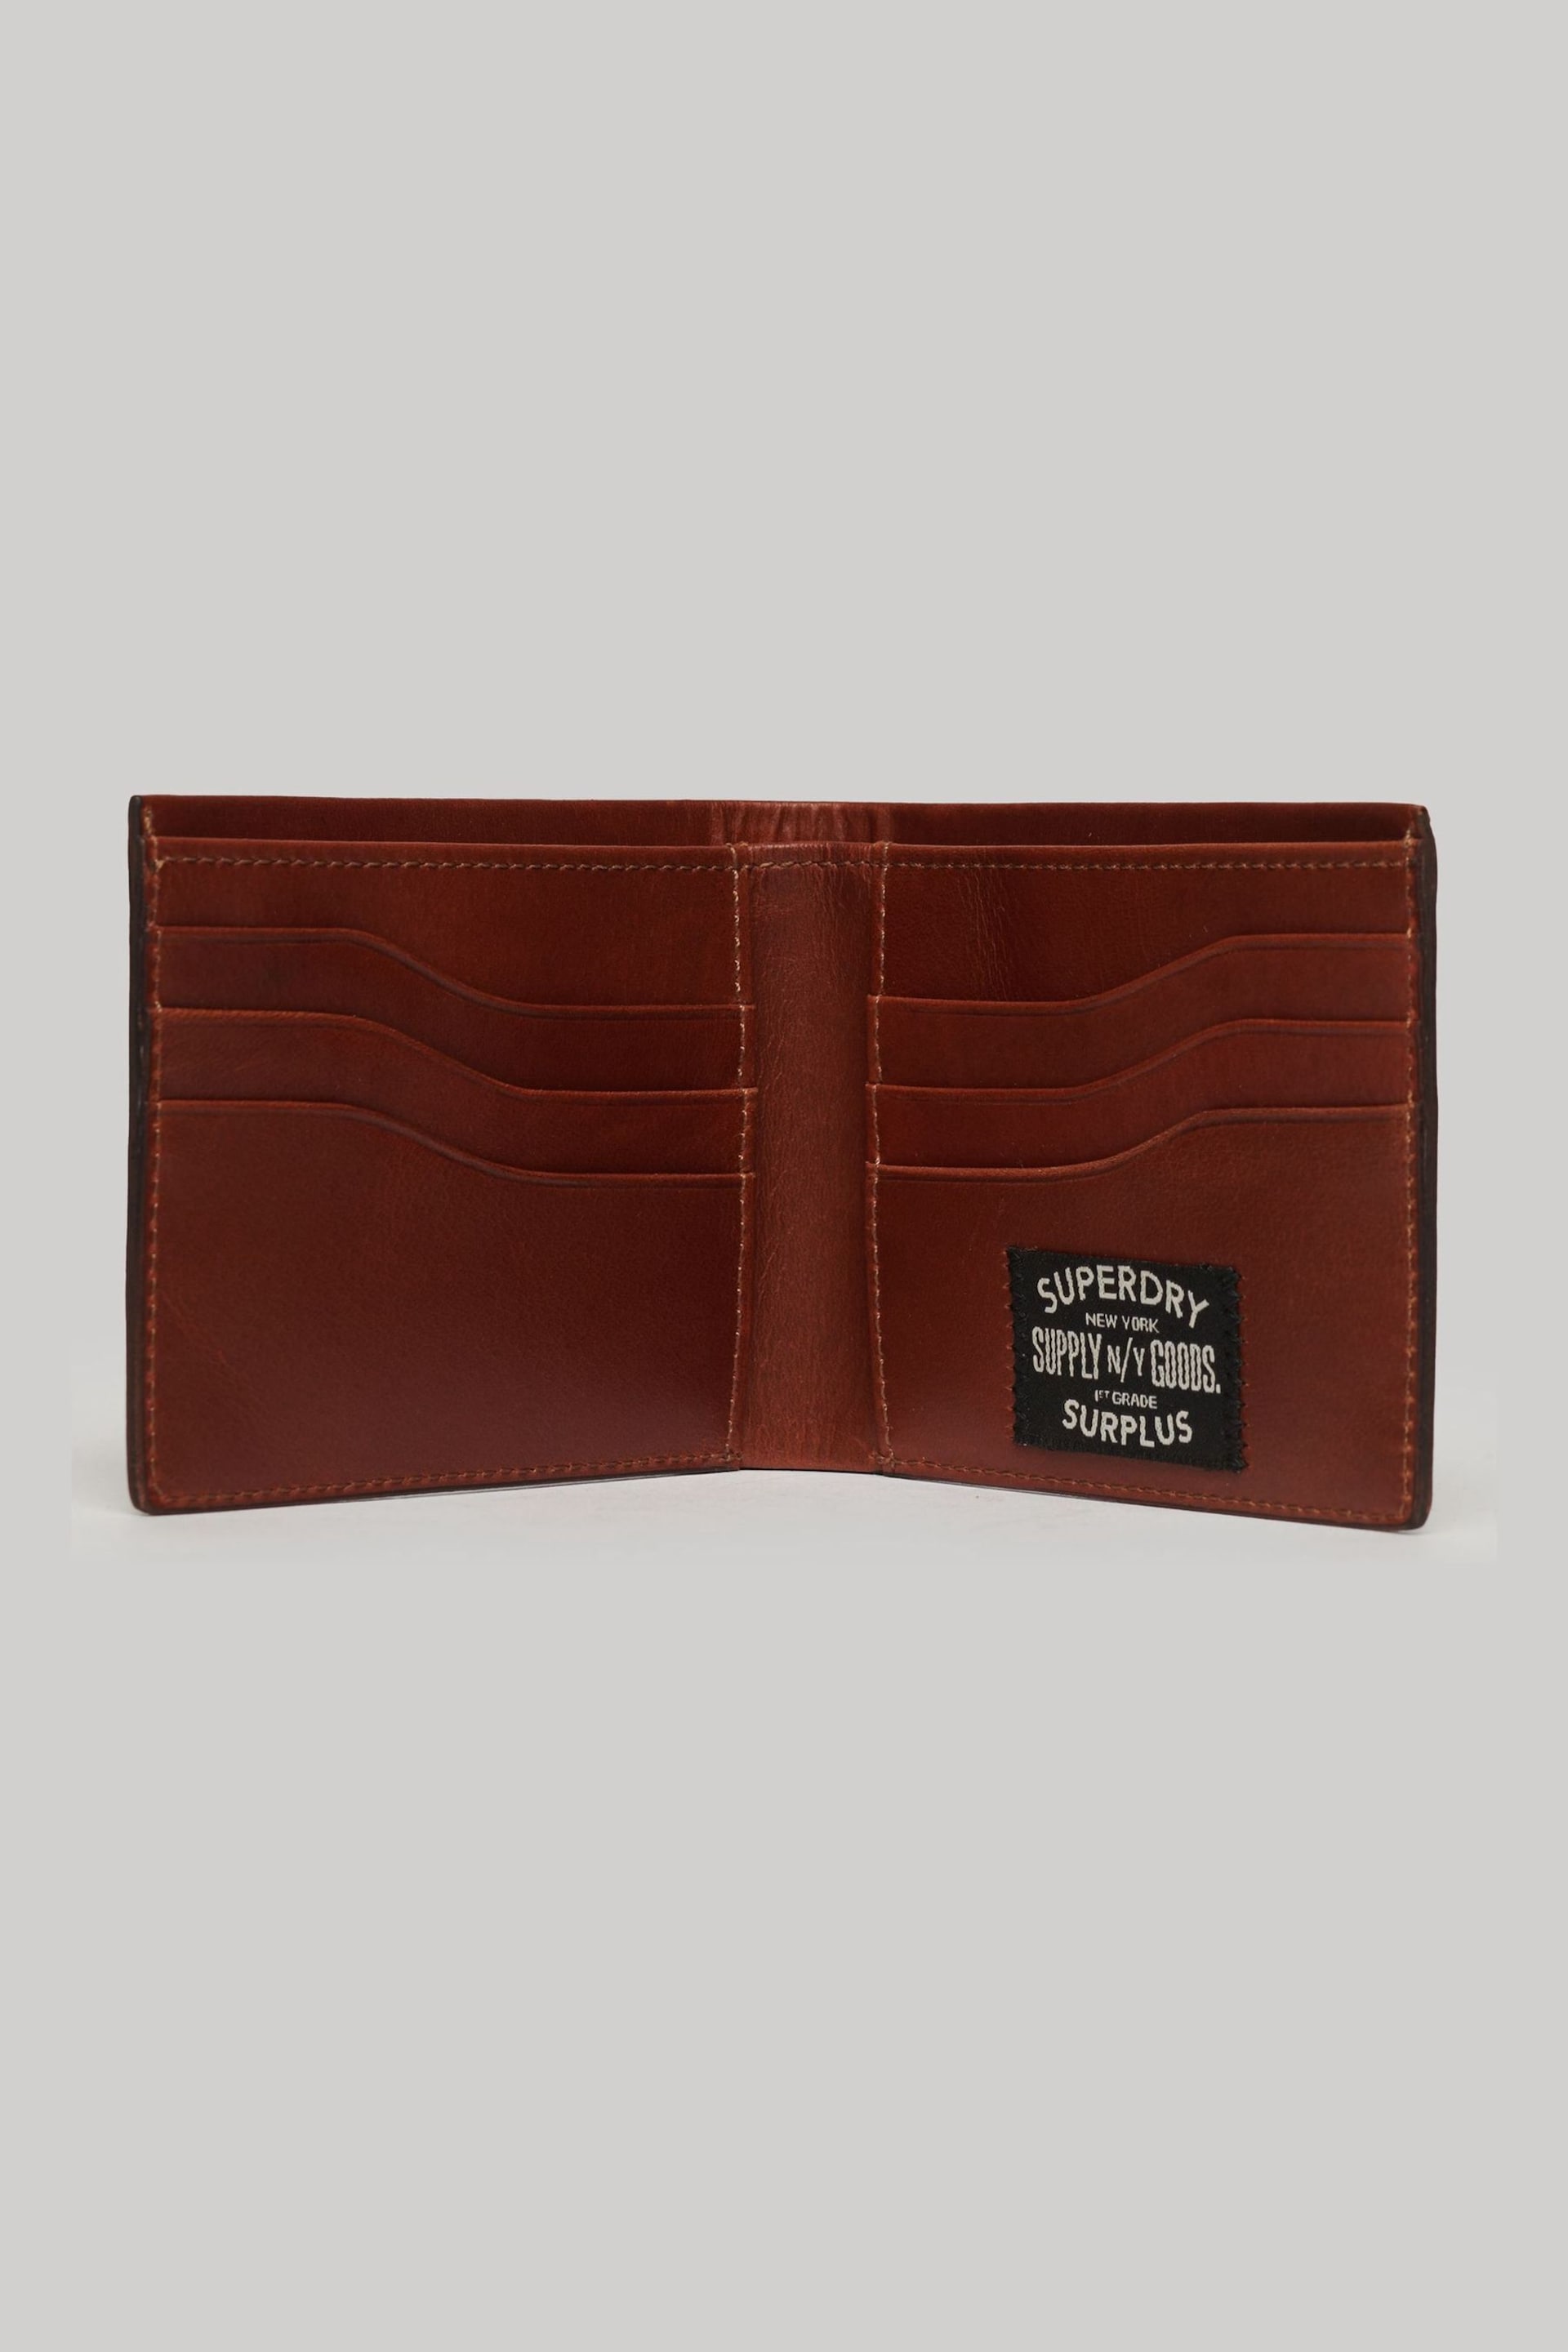 Superdry Brown Leather Wallet In Box - Image 5 of 6